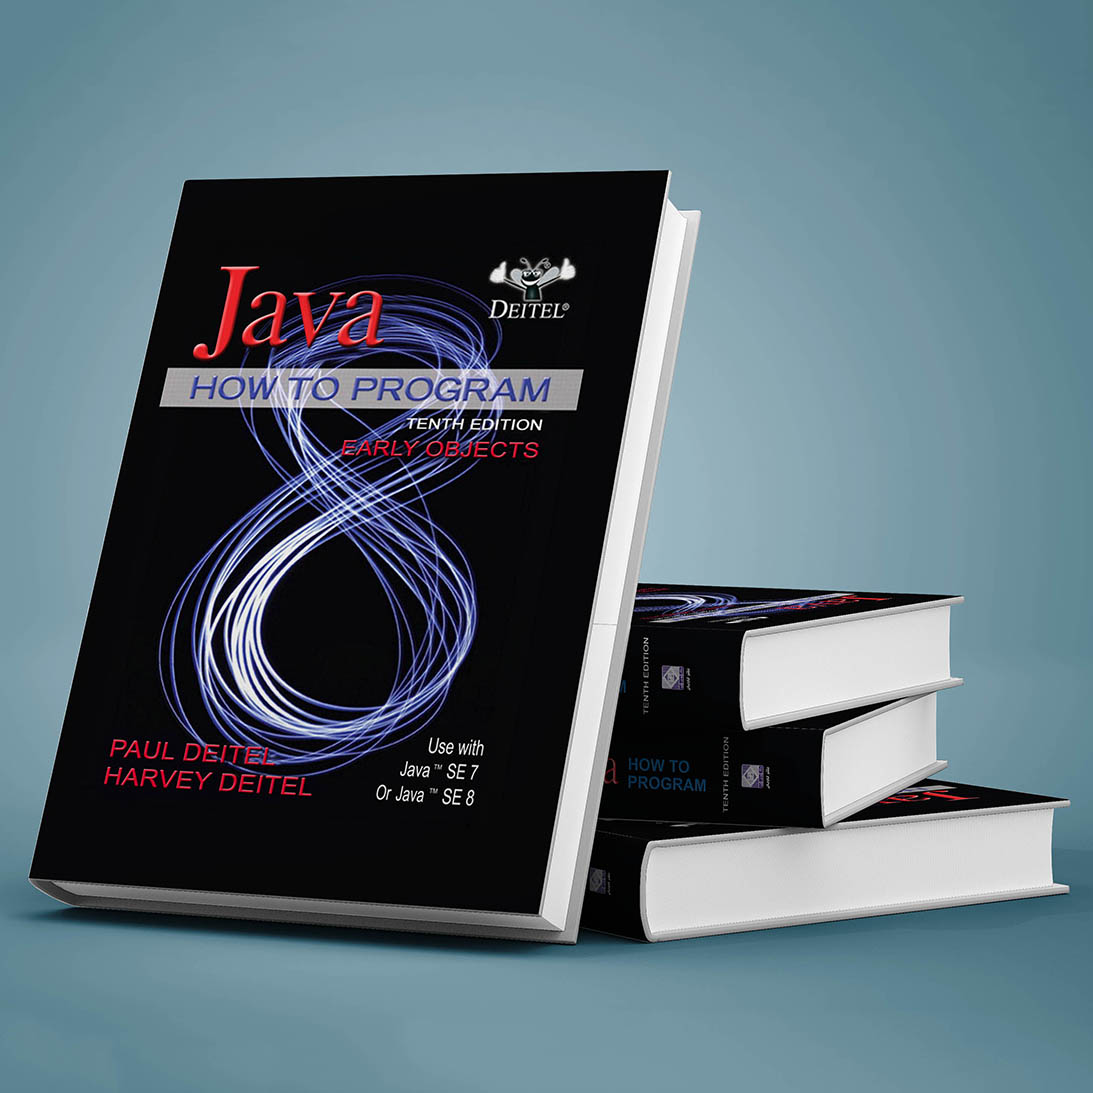 java how to program early objects 10th edition pdf free download